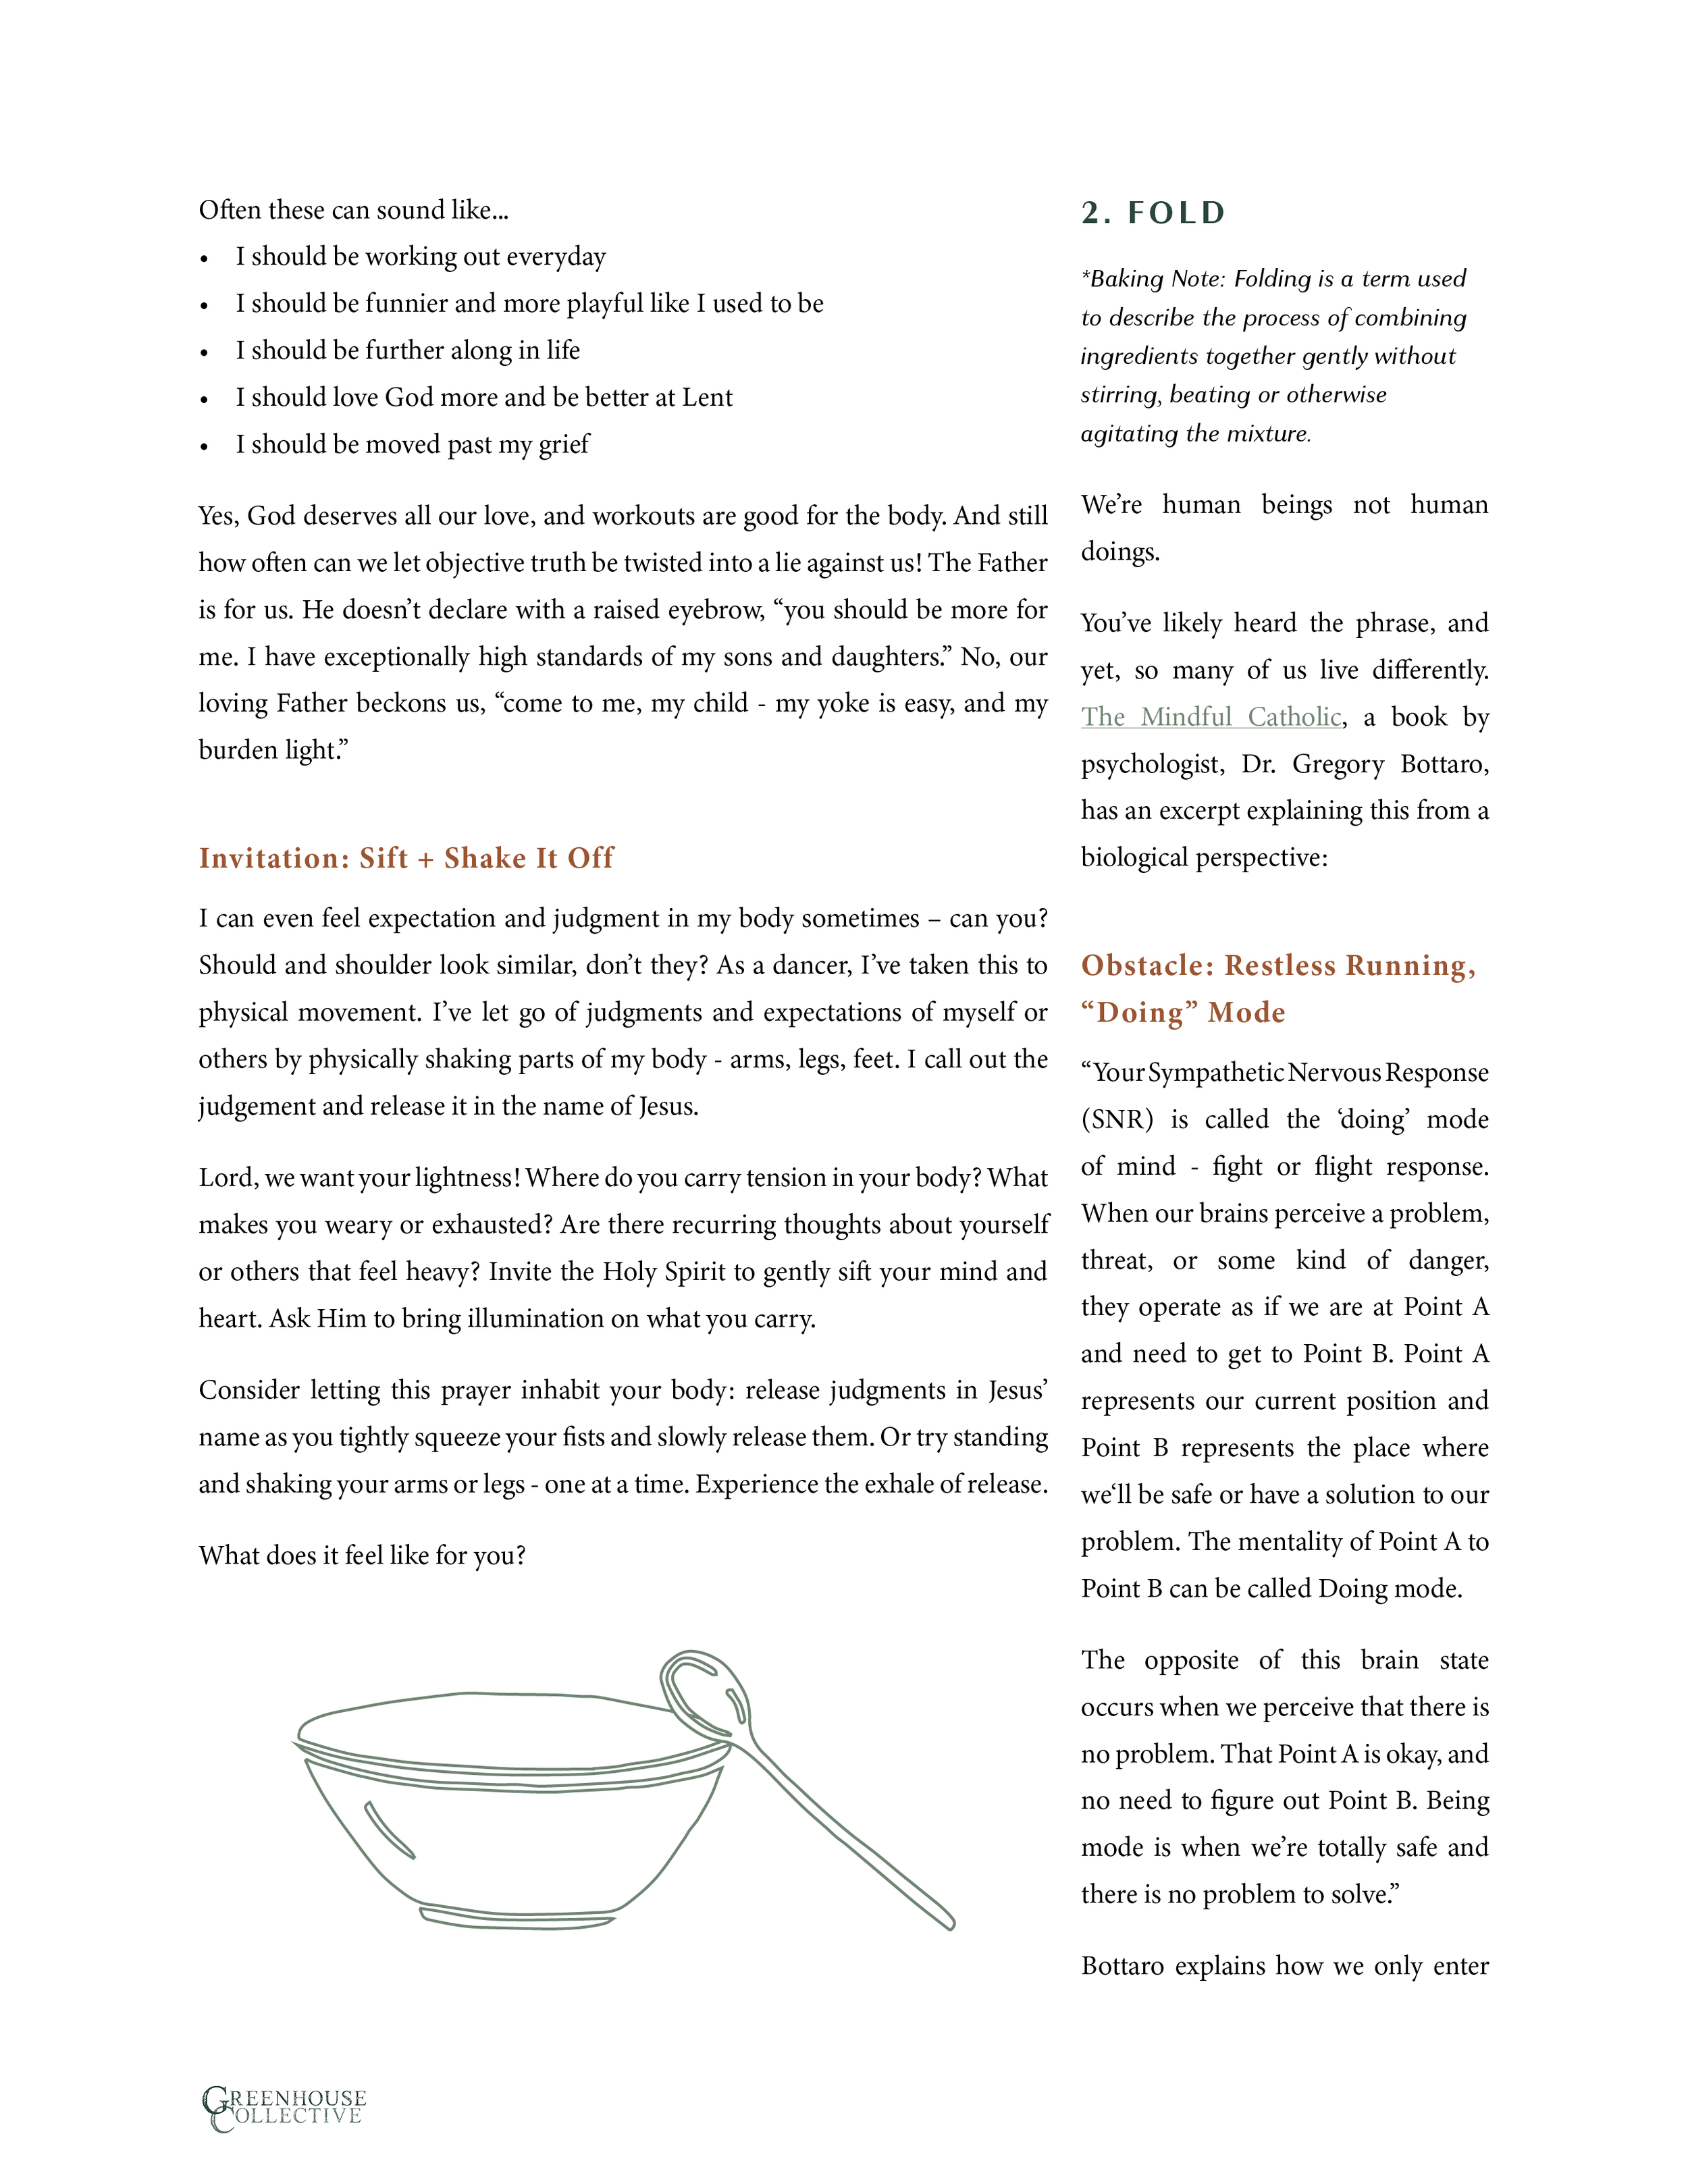 Recipe for Deeper Rest_page2.png